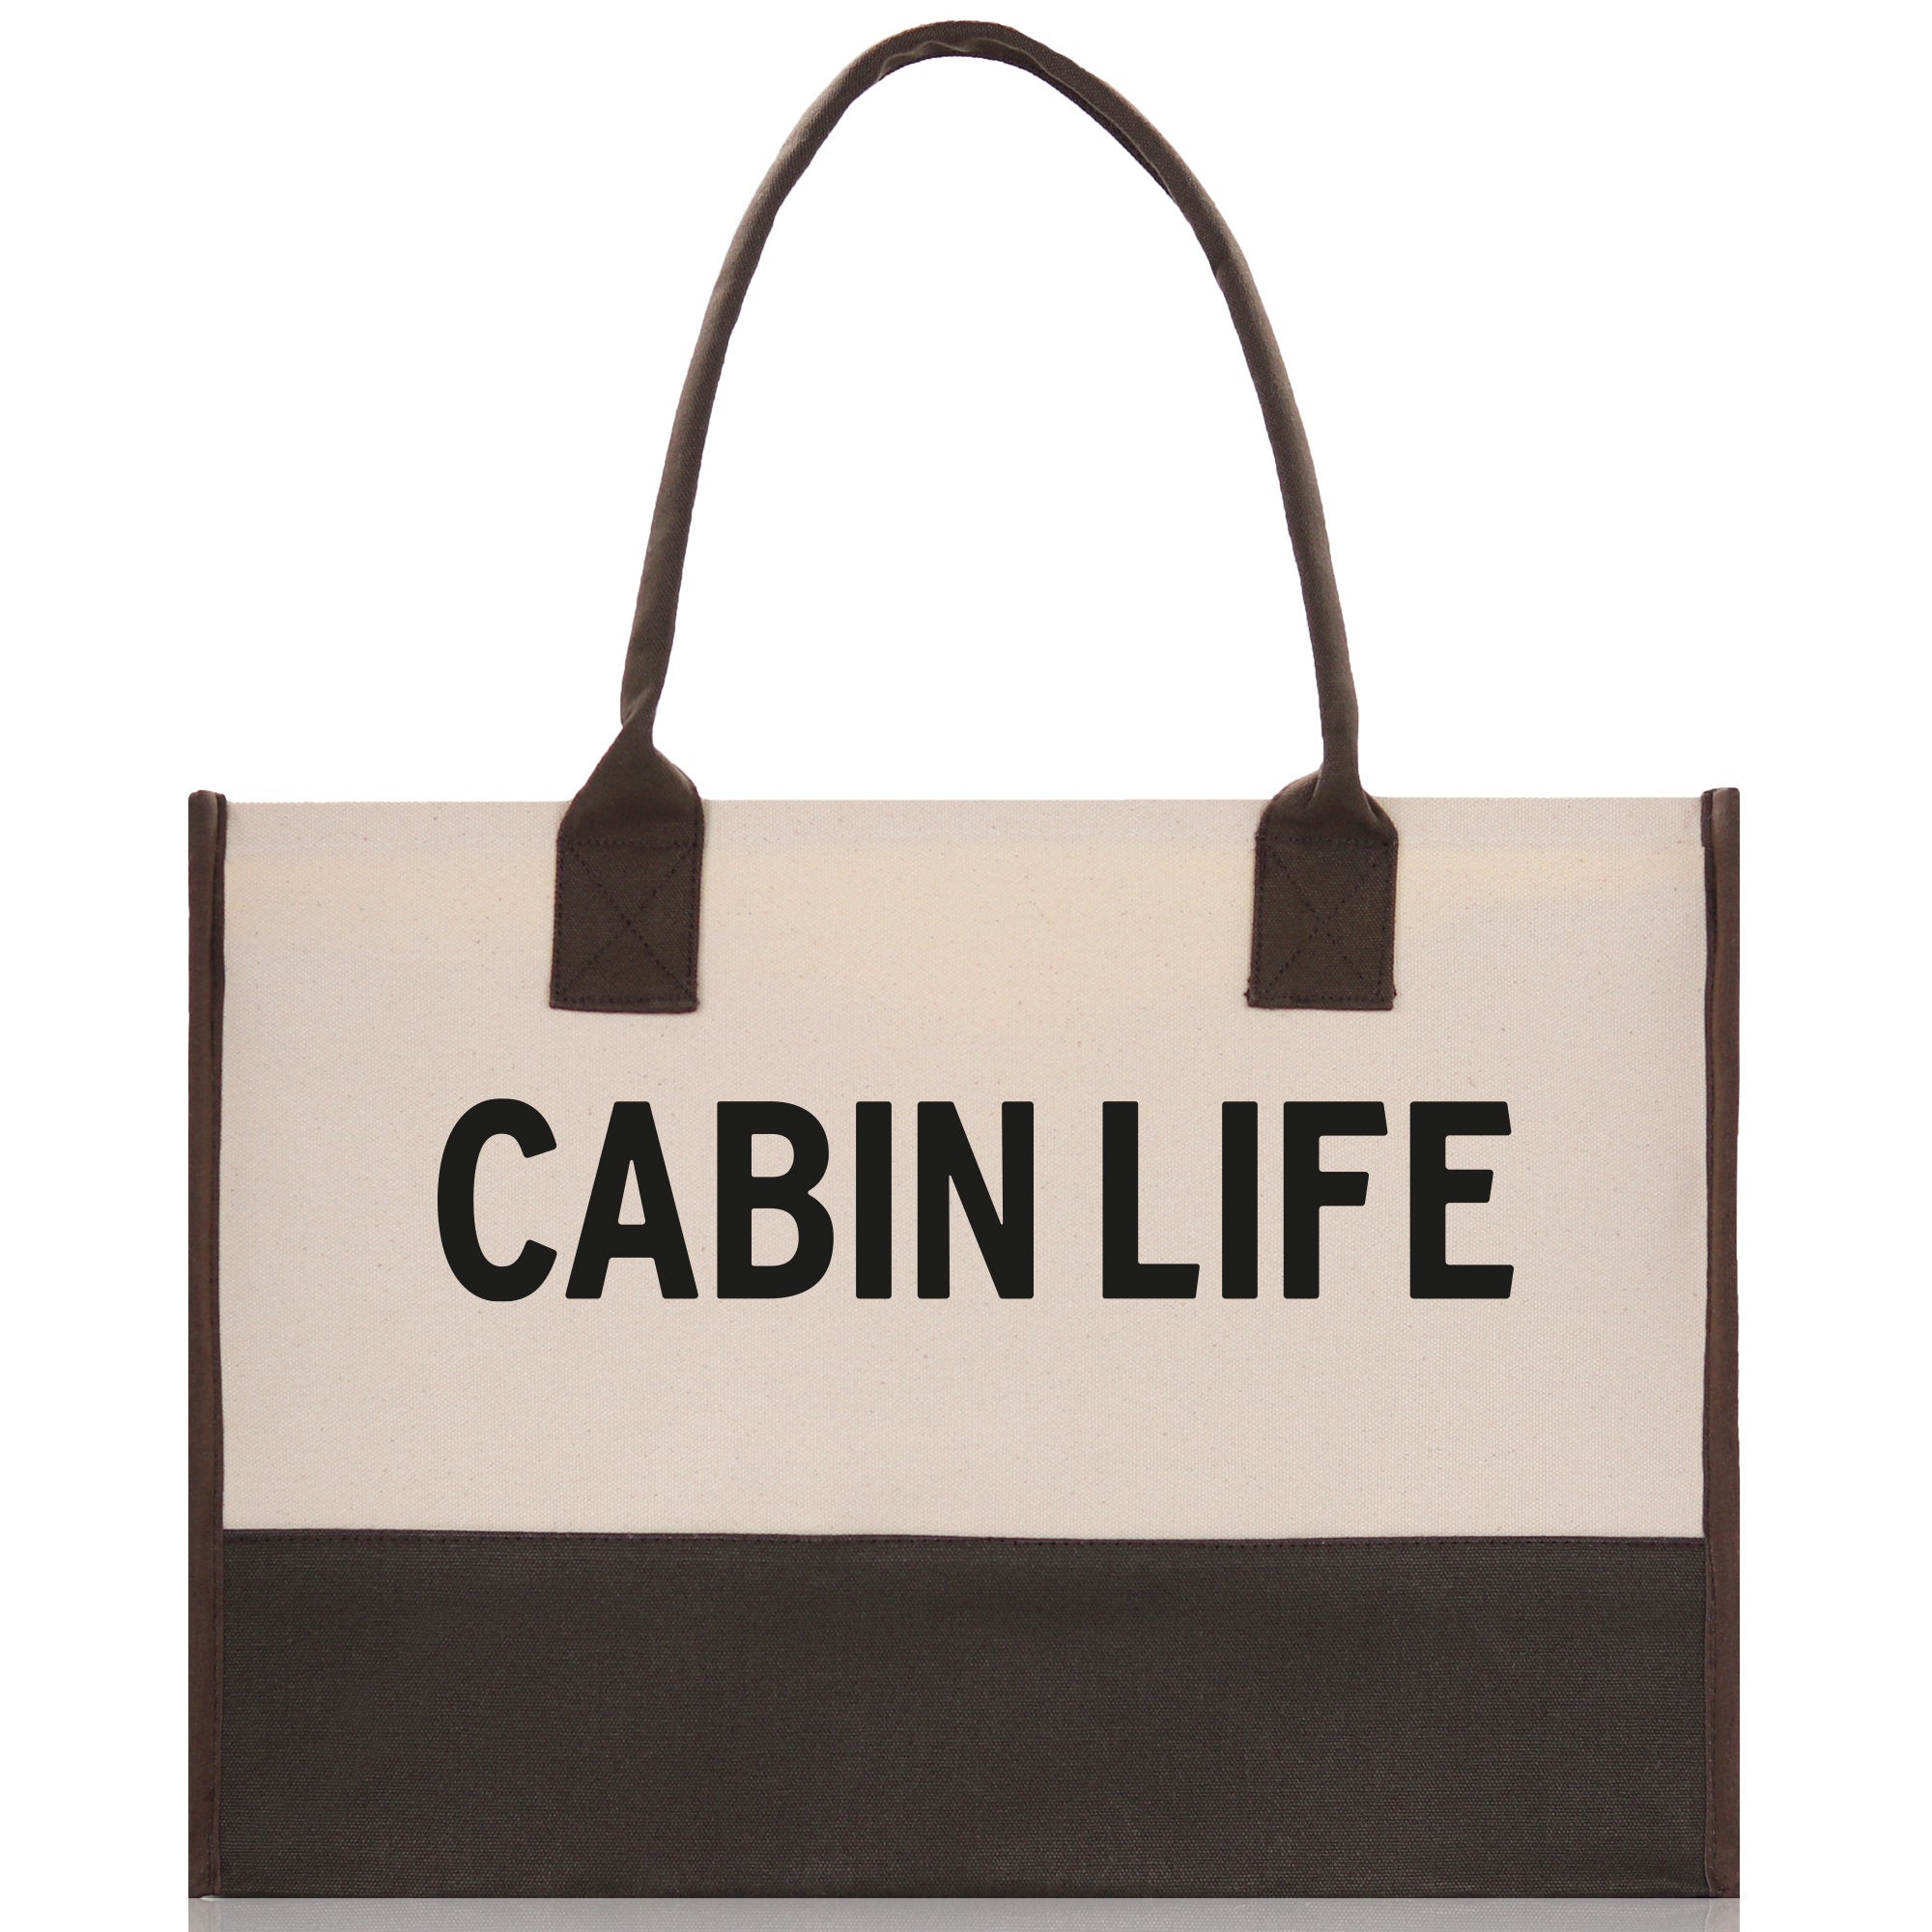 Cabin Life Cotton Canvas Chic Tote Bag Camping Tote Camping Lover Gift Tote Bag Outdoor Tote Weekender Tote Camper Tote Multipurpose Tote